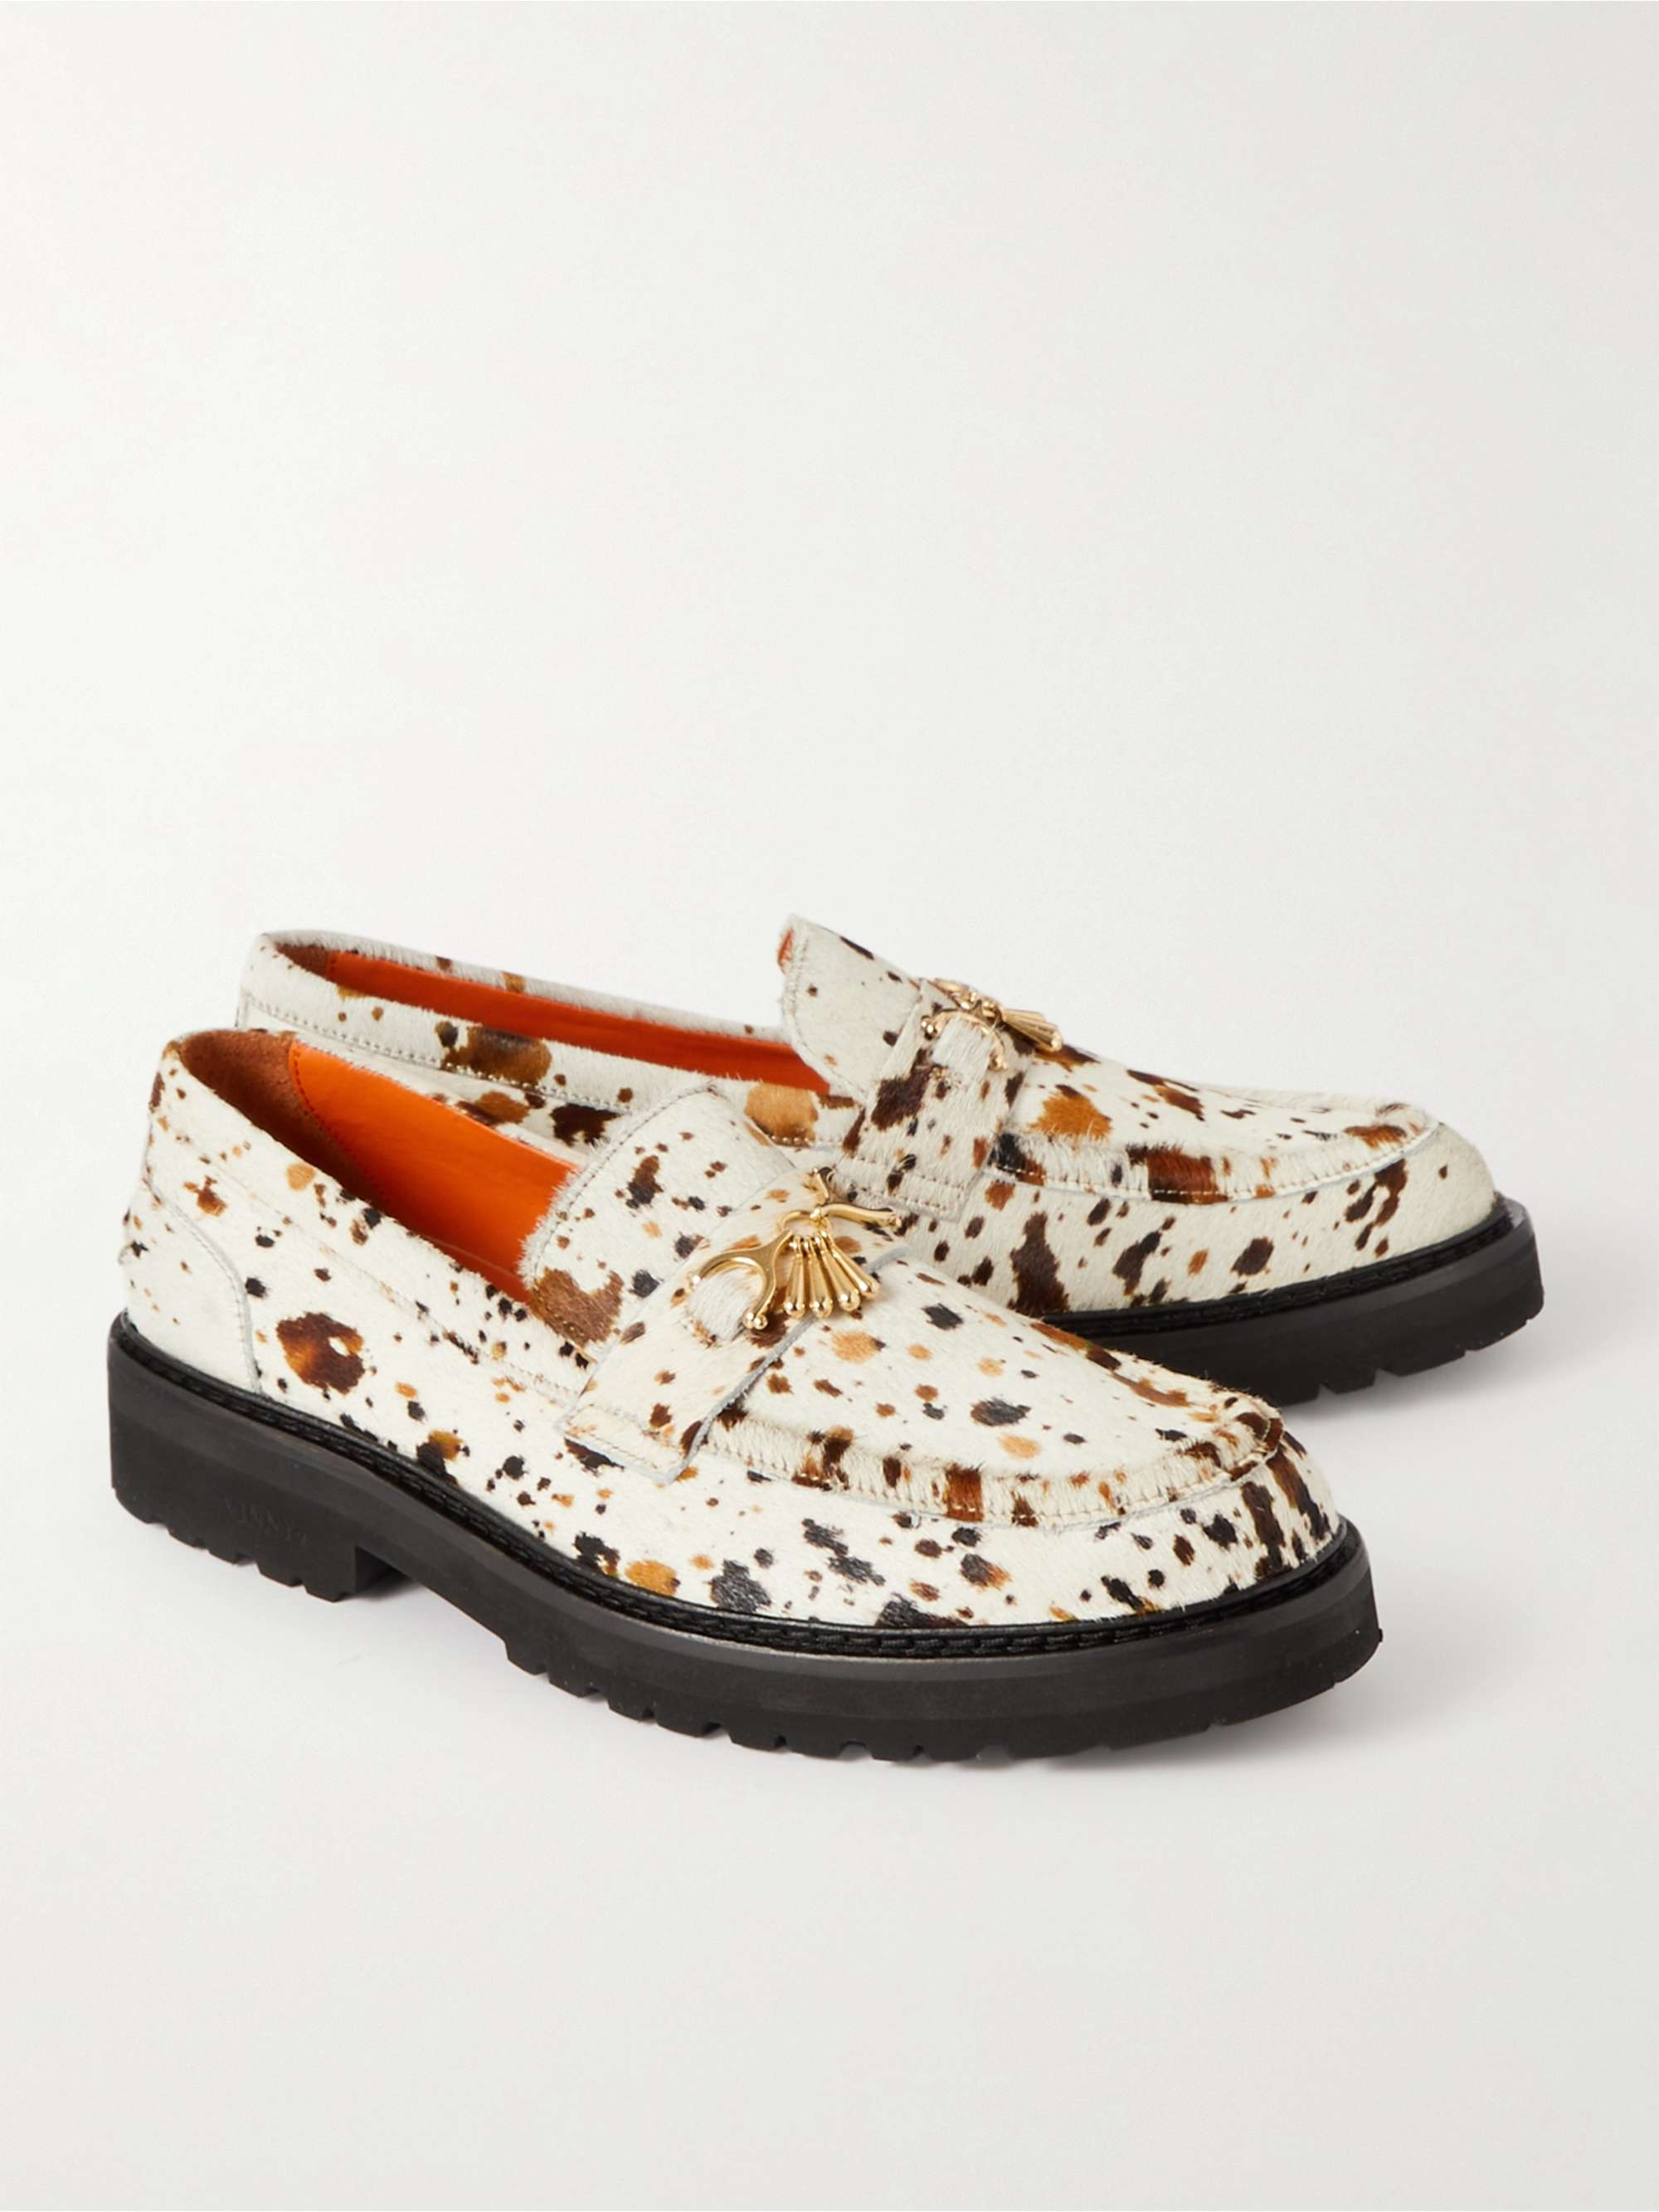 VINNY'S + Soulland Palace Embellished Full-Grain Leather Loafers